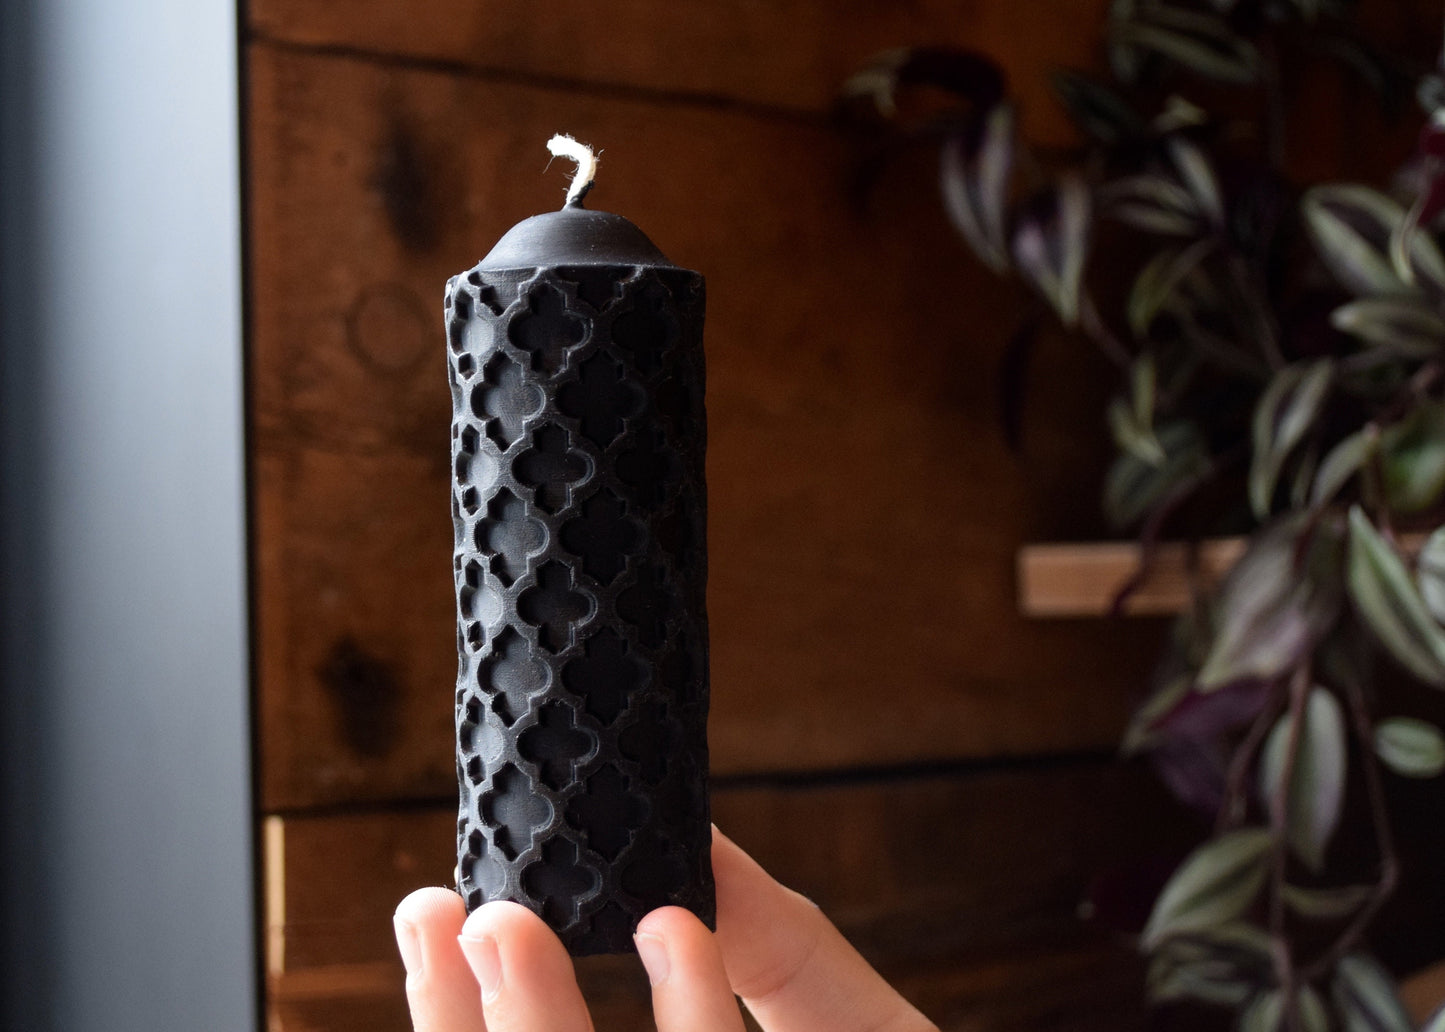 Black Beeswax Candle / One Black, Candle, Beeswax- One Beeswax Candle // Pillar Candle, Eco Friendly, Non Toxic